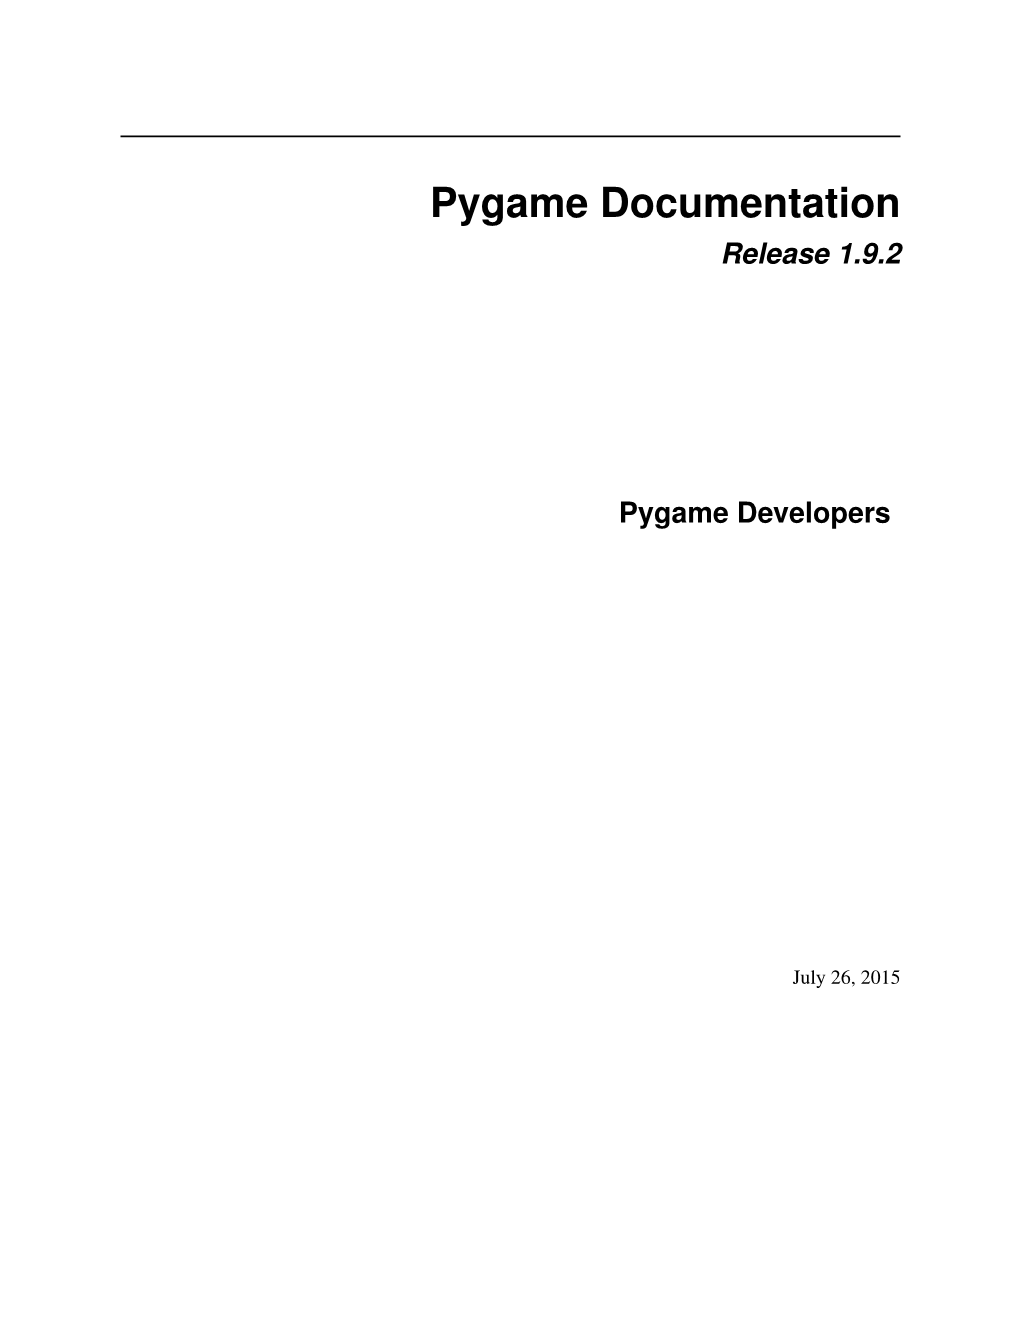 Pygame Documentation Release 1.9.2